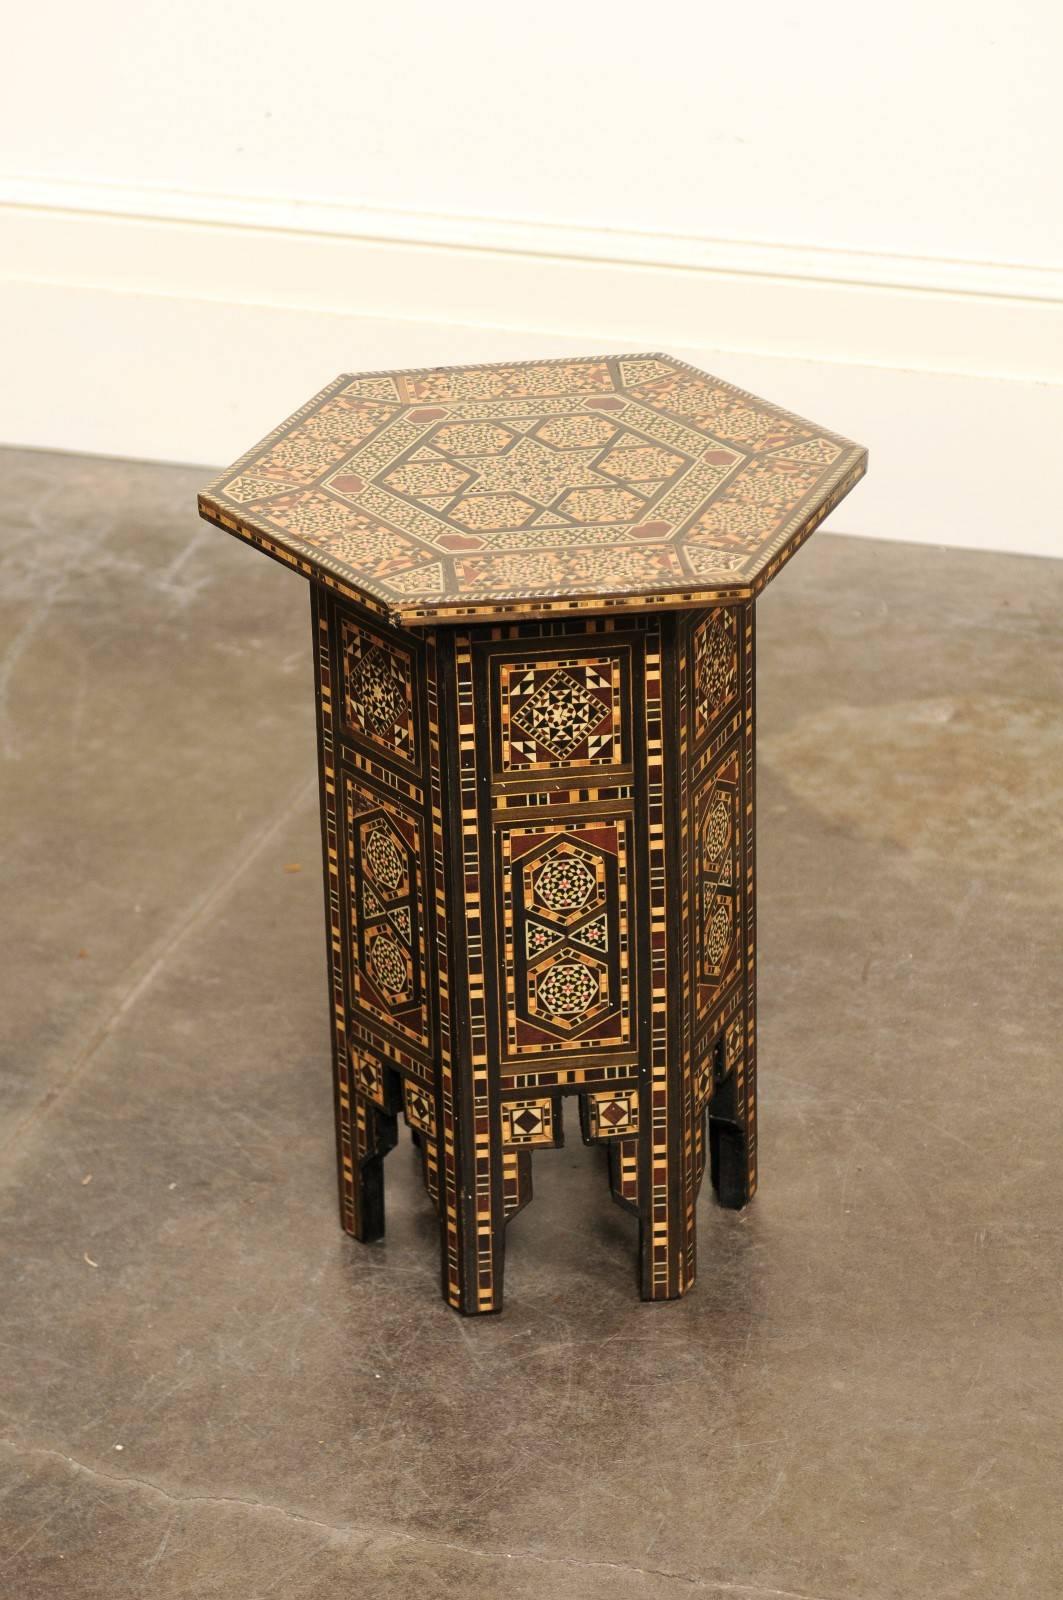 This petite Moroccan drinks table from the Mid-Century features an hexagonal top adorned with a delicate wood and bone inlay depicting an elaborate geometrical design with central star. Each panel of the hexagonal base shows a sumptuous decorative